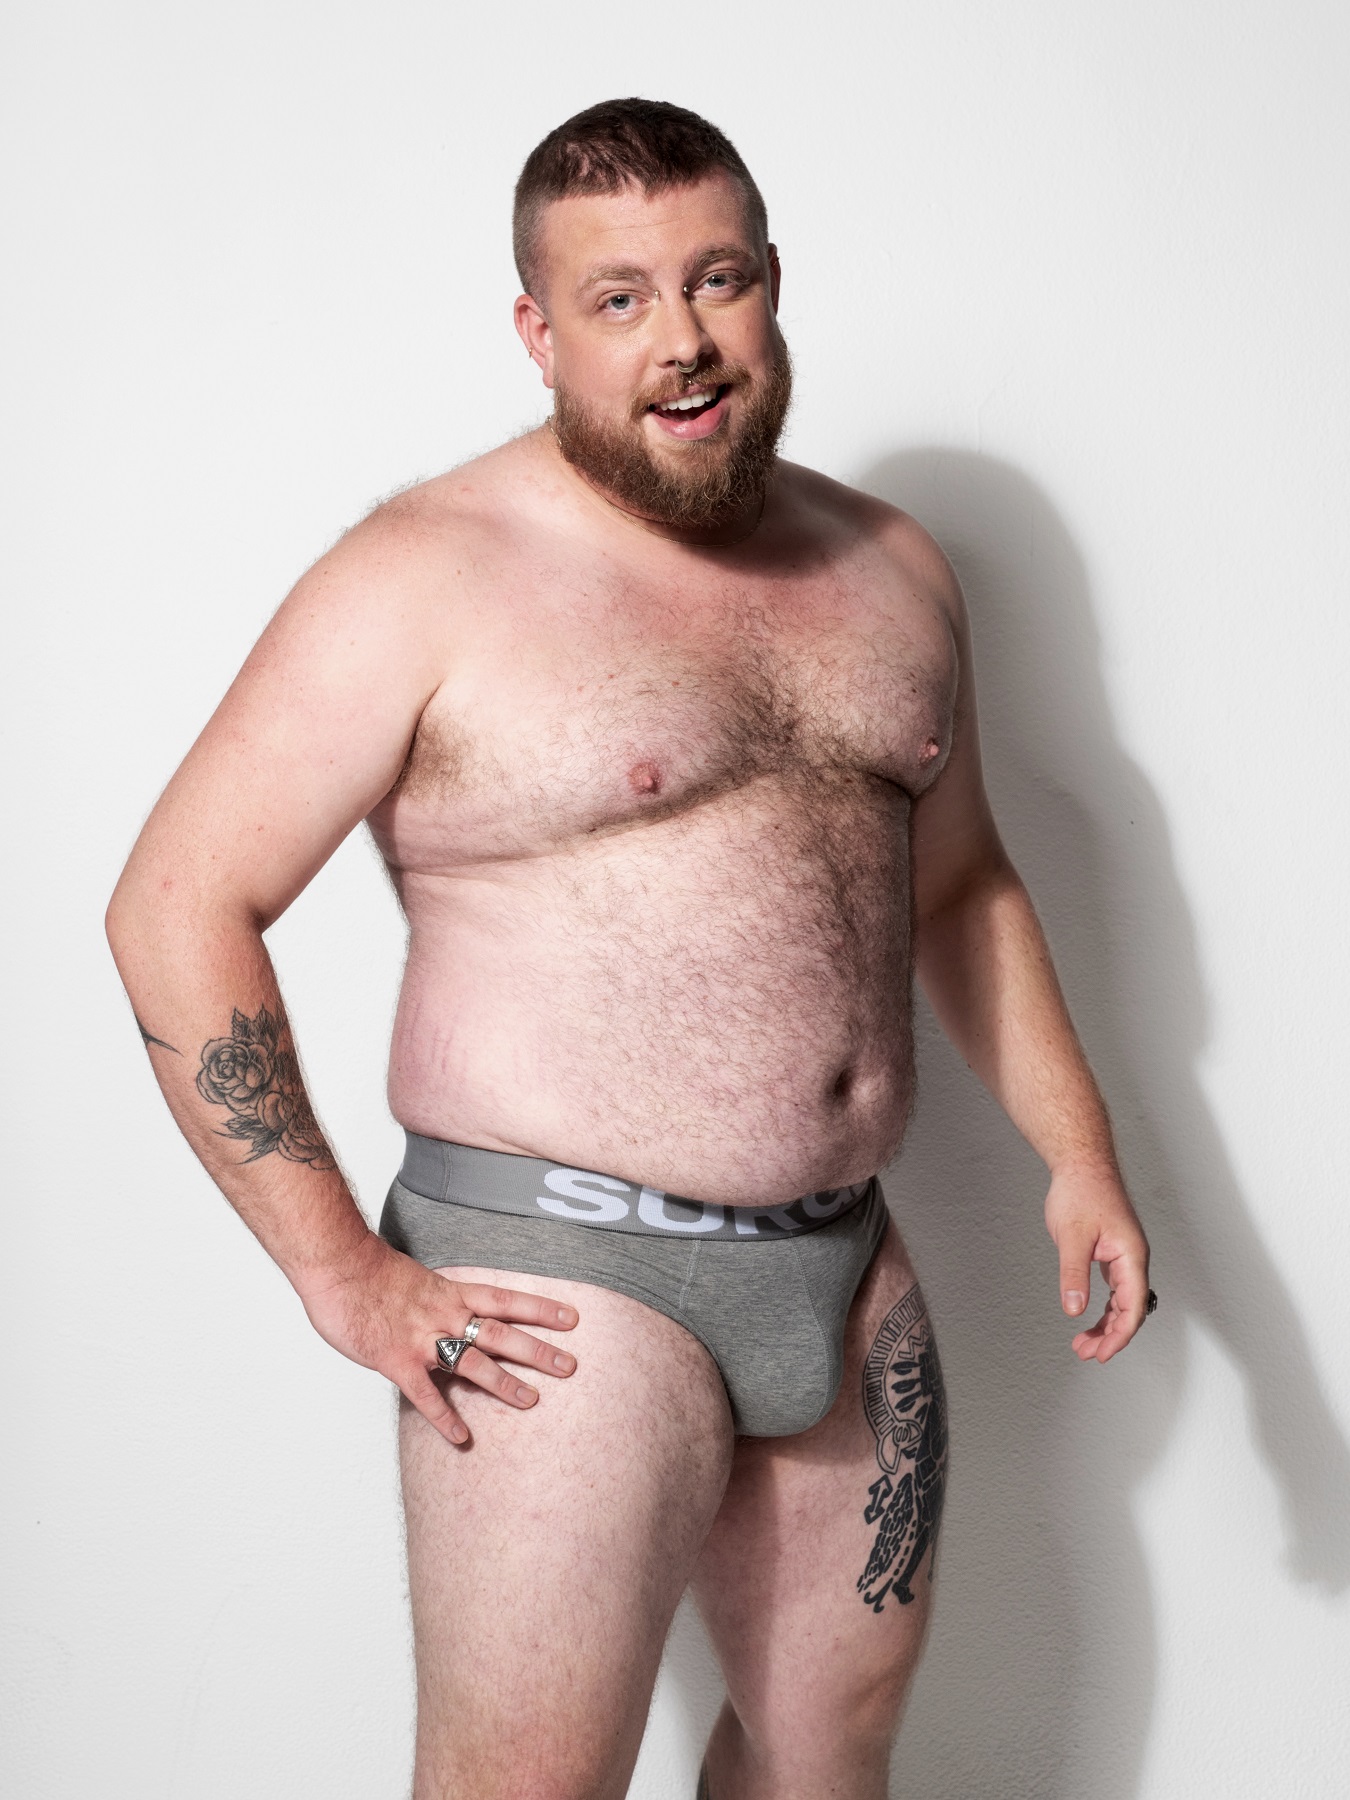 This new underwear brand is celebrating men of all shapes and sizes